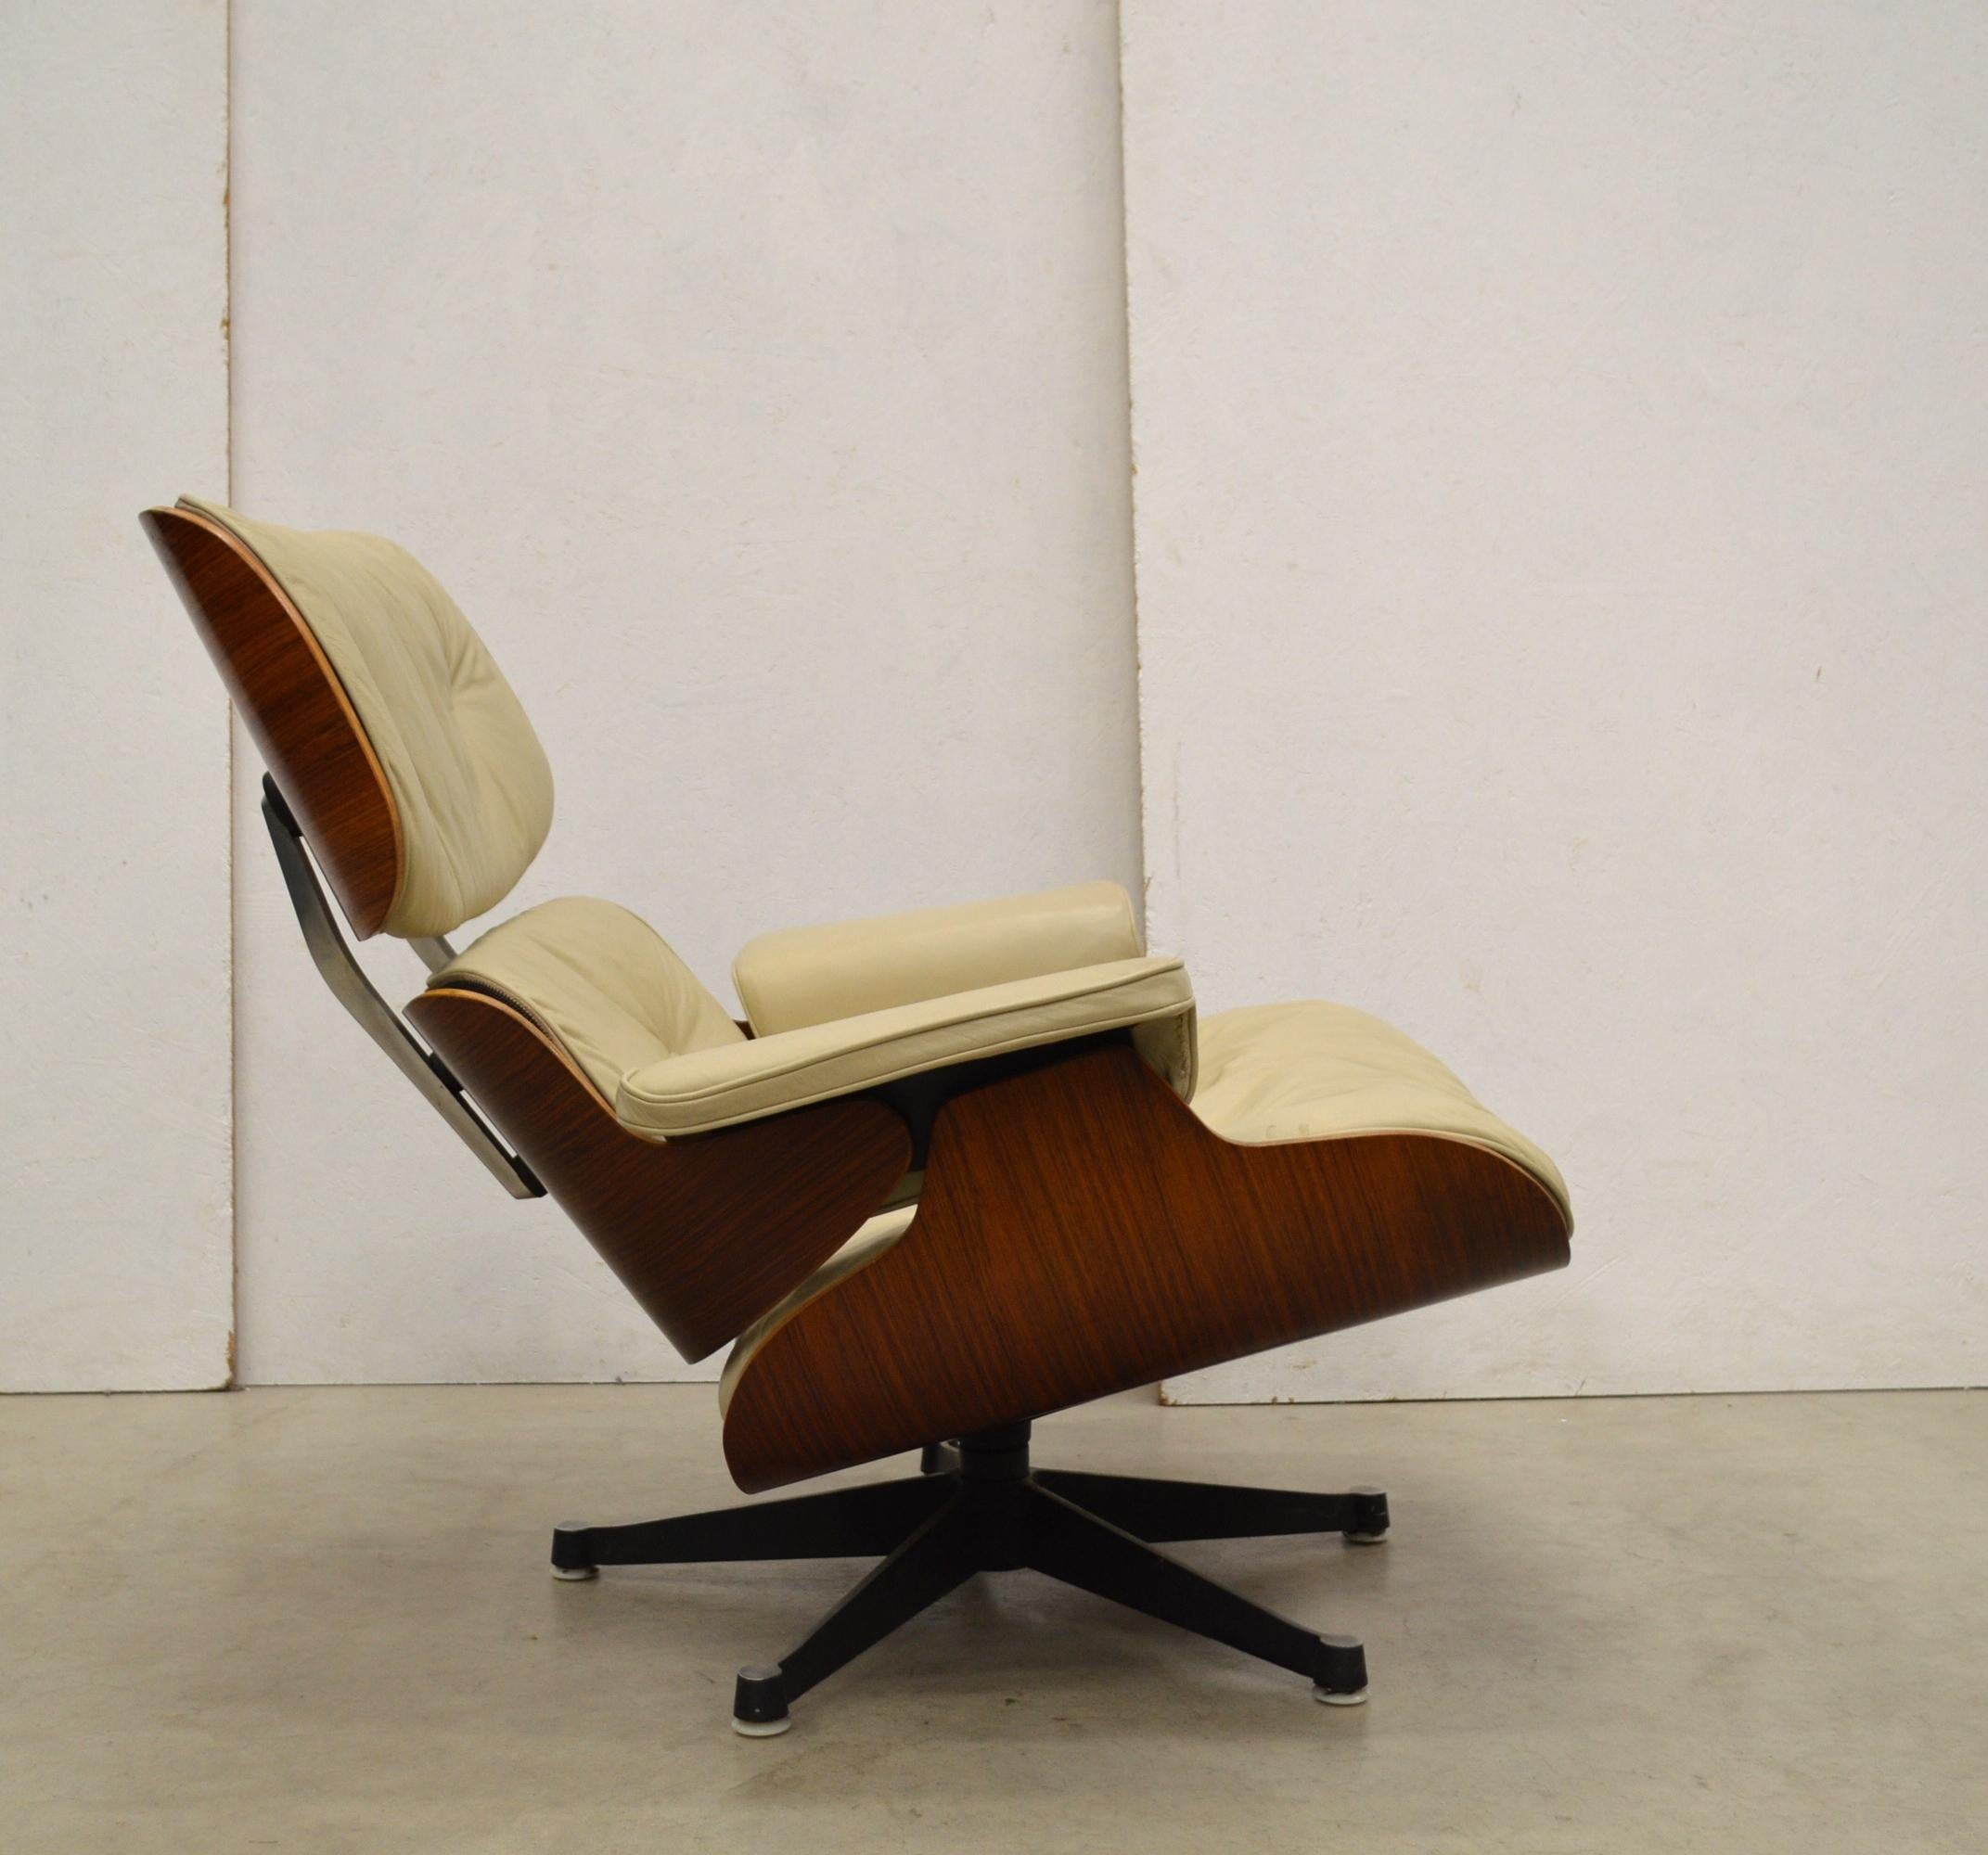 English 1st European Edition Eames Lounge Chair Hille Herman Miller 1950s